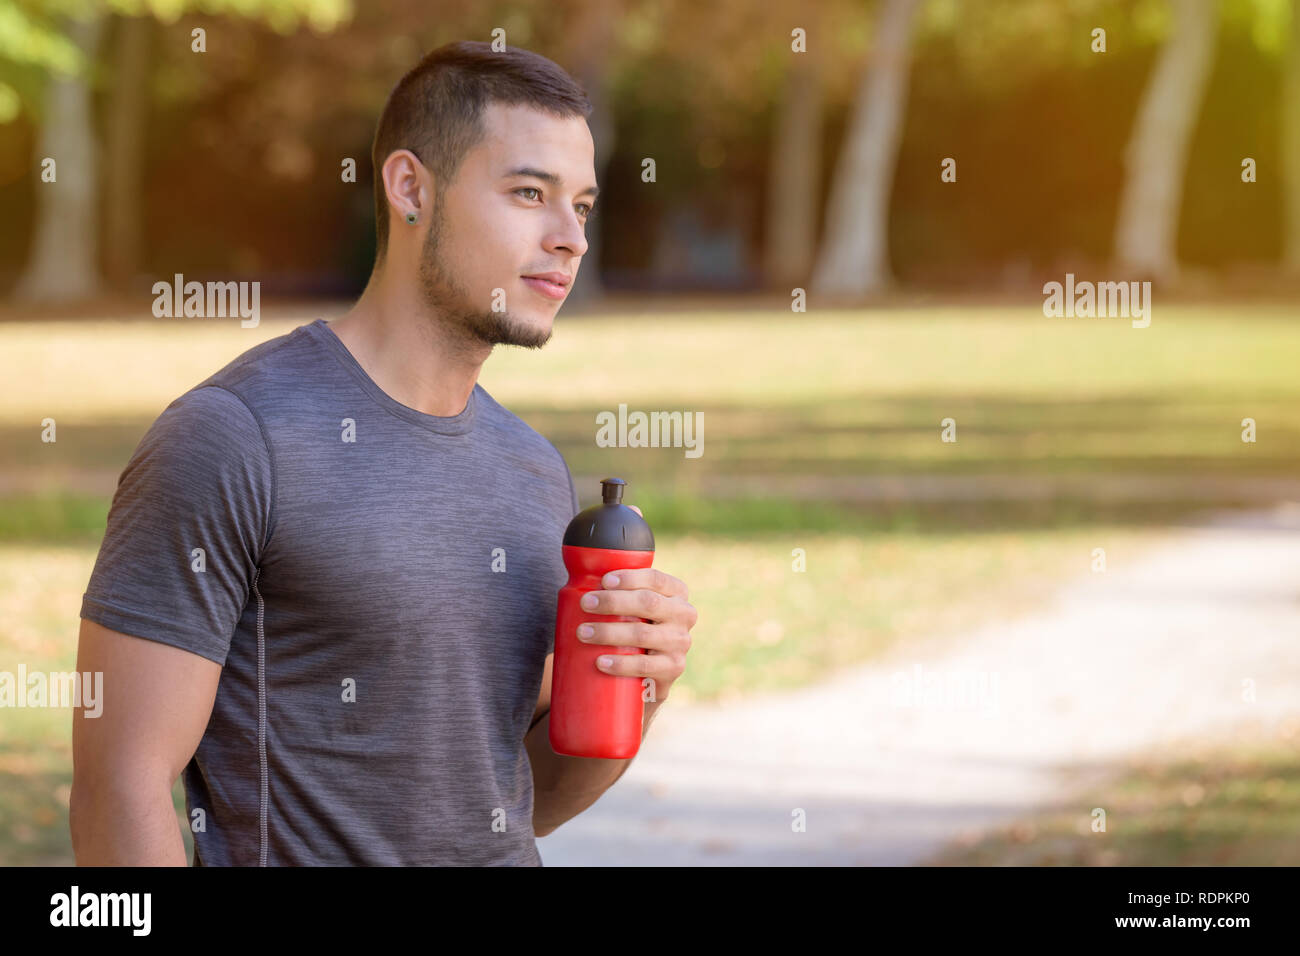 Latin man runner looking thinking water bottle running jogging sports training fitness copyspace copy space outdoor Stock Photo